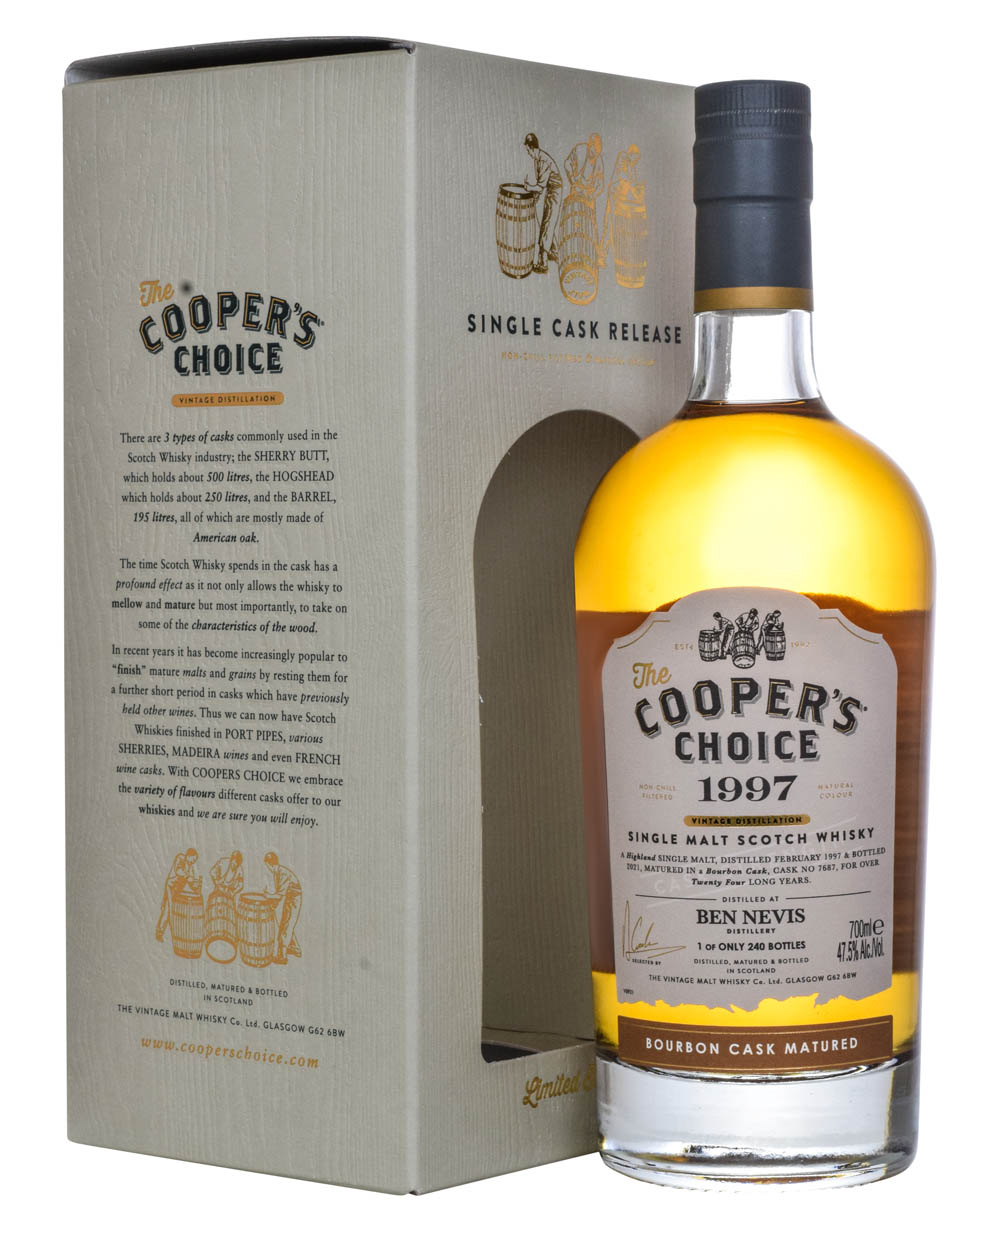 Ben Nevis 24 Years Old The Cooper's Choice 1997 Box Must Have Malts